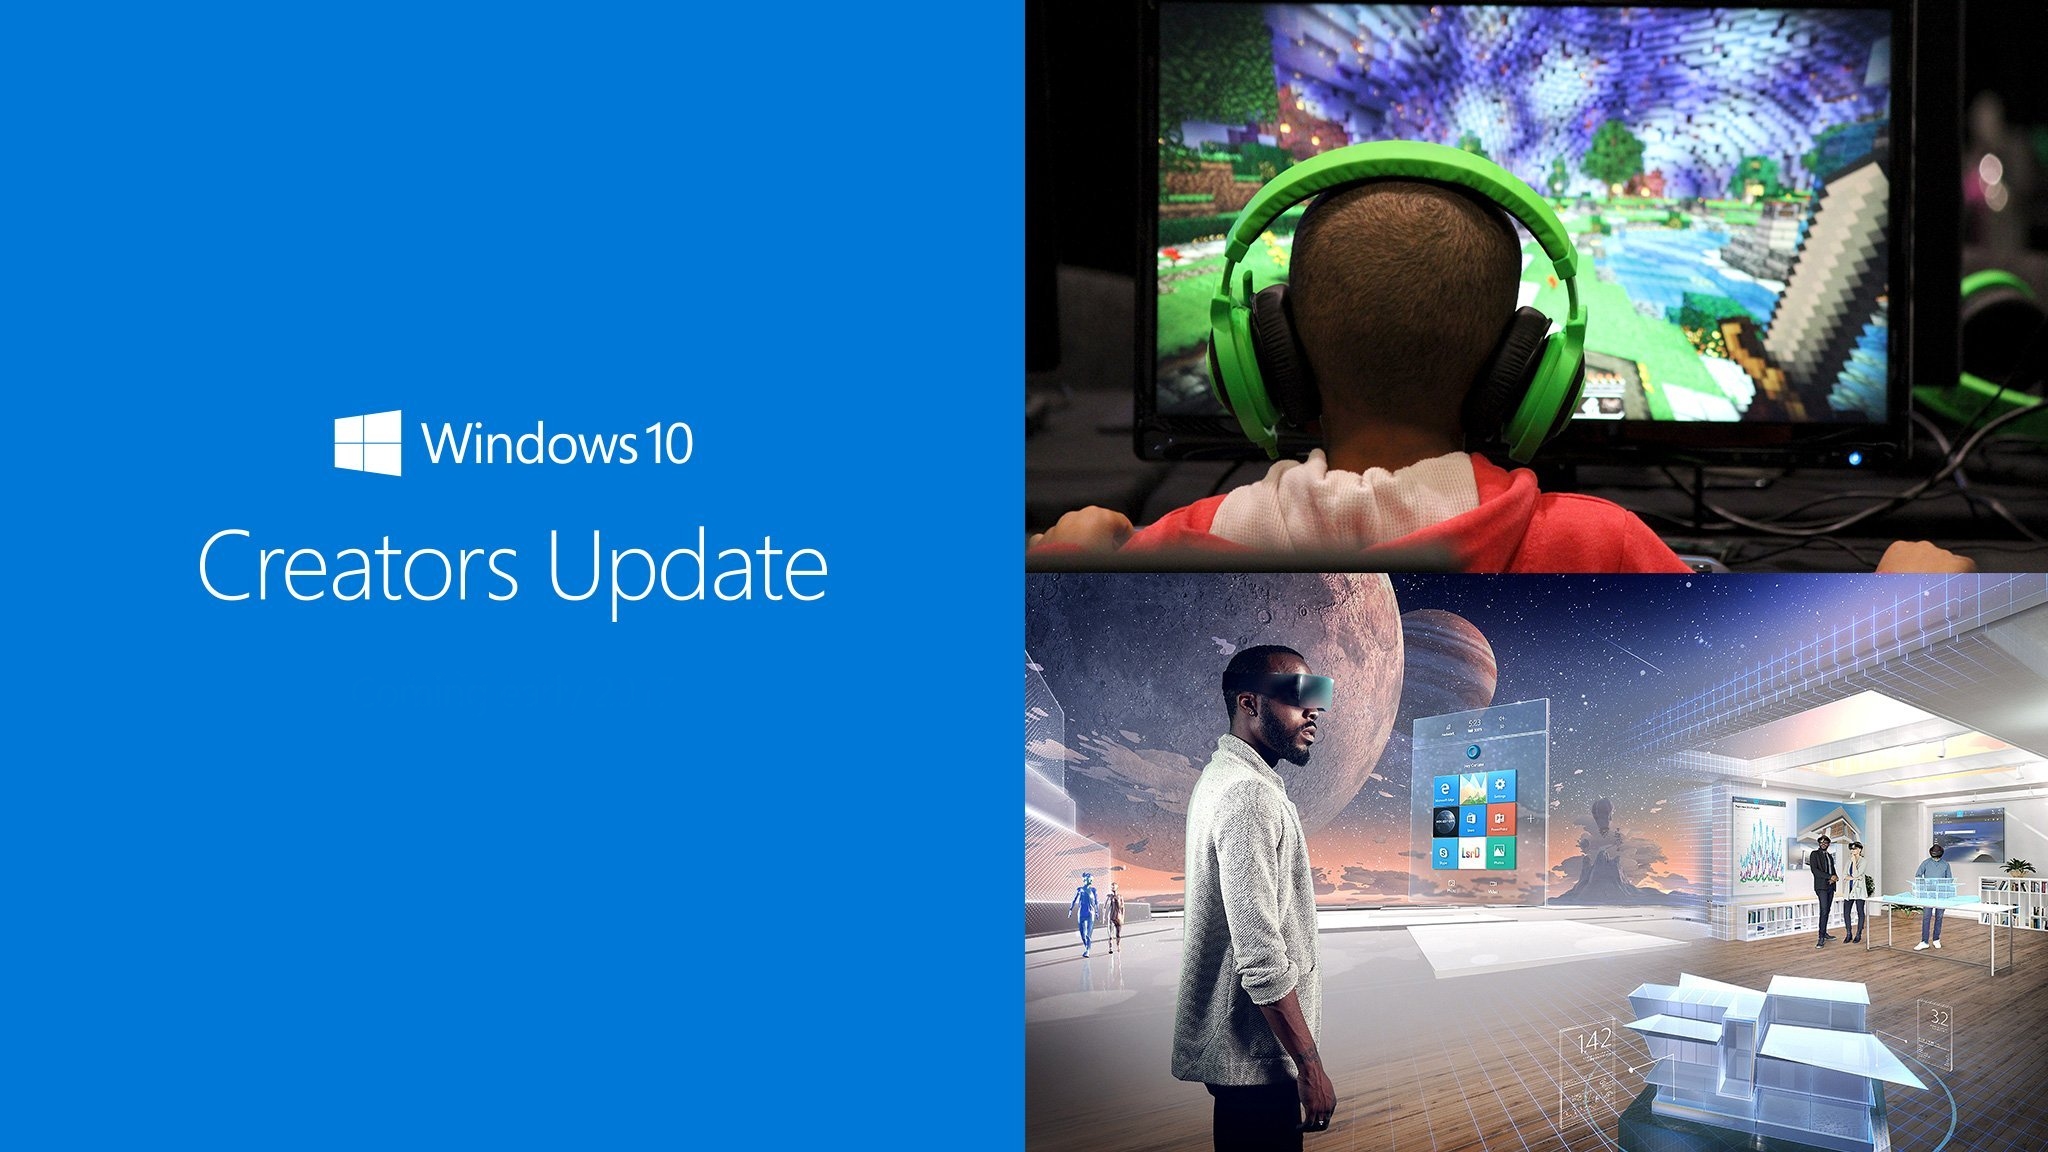 Windows 10 Creators Update arrives early on the PC